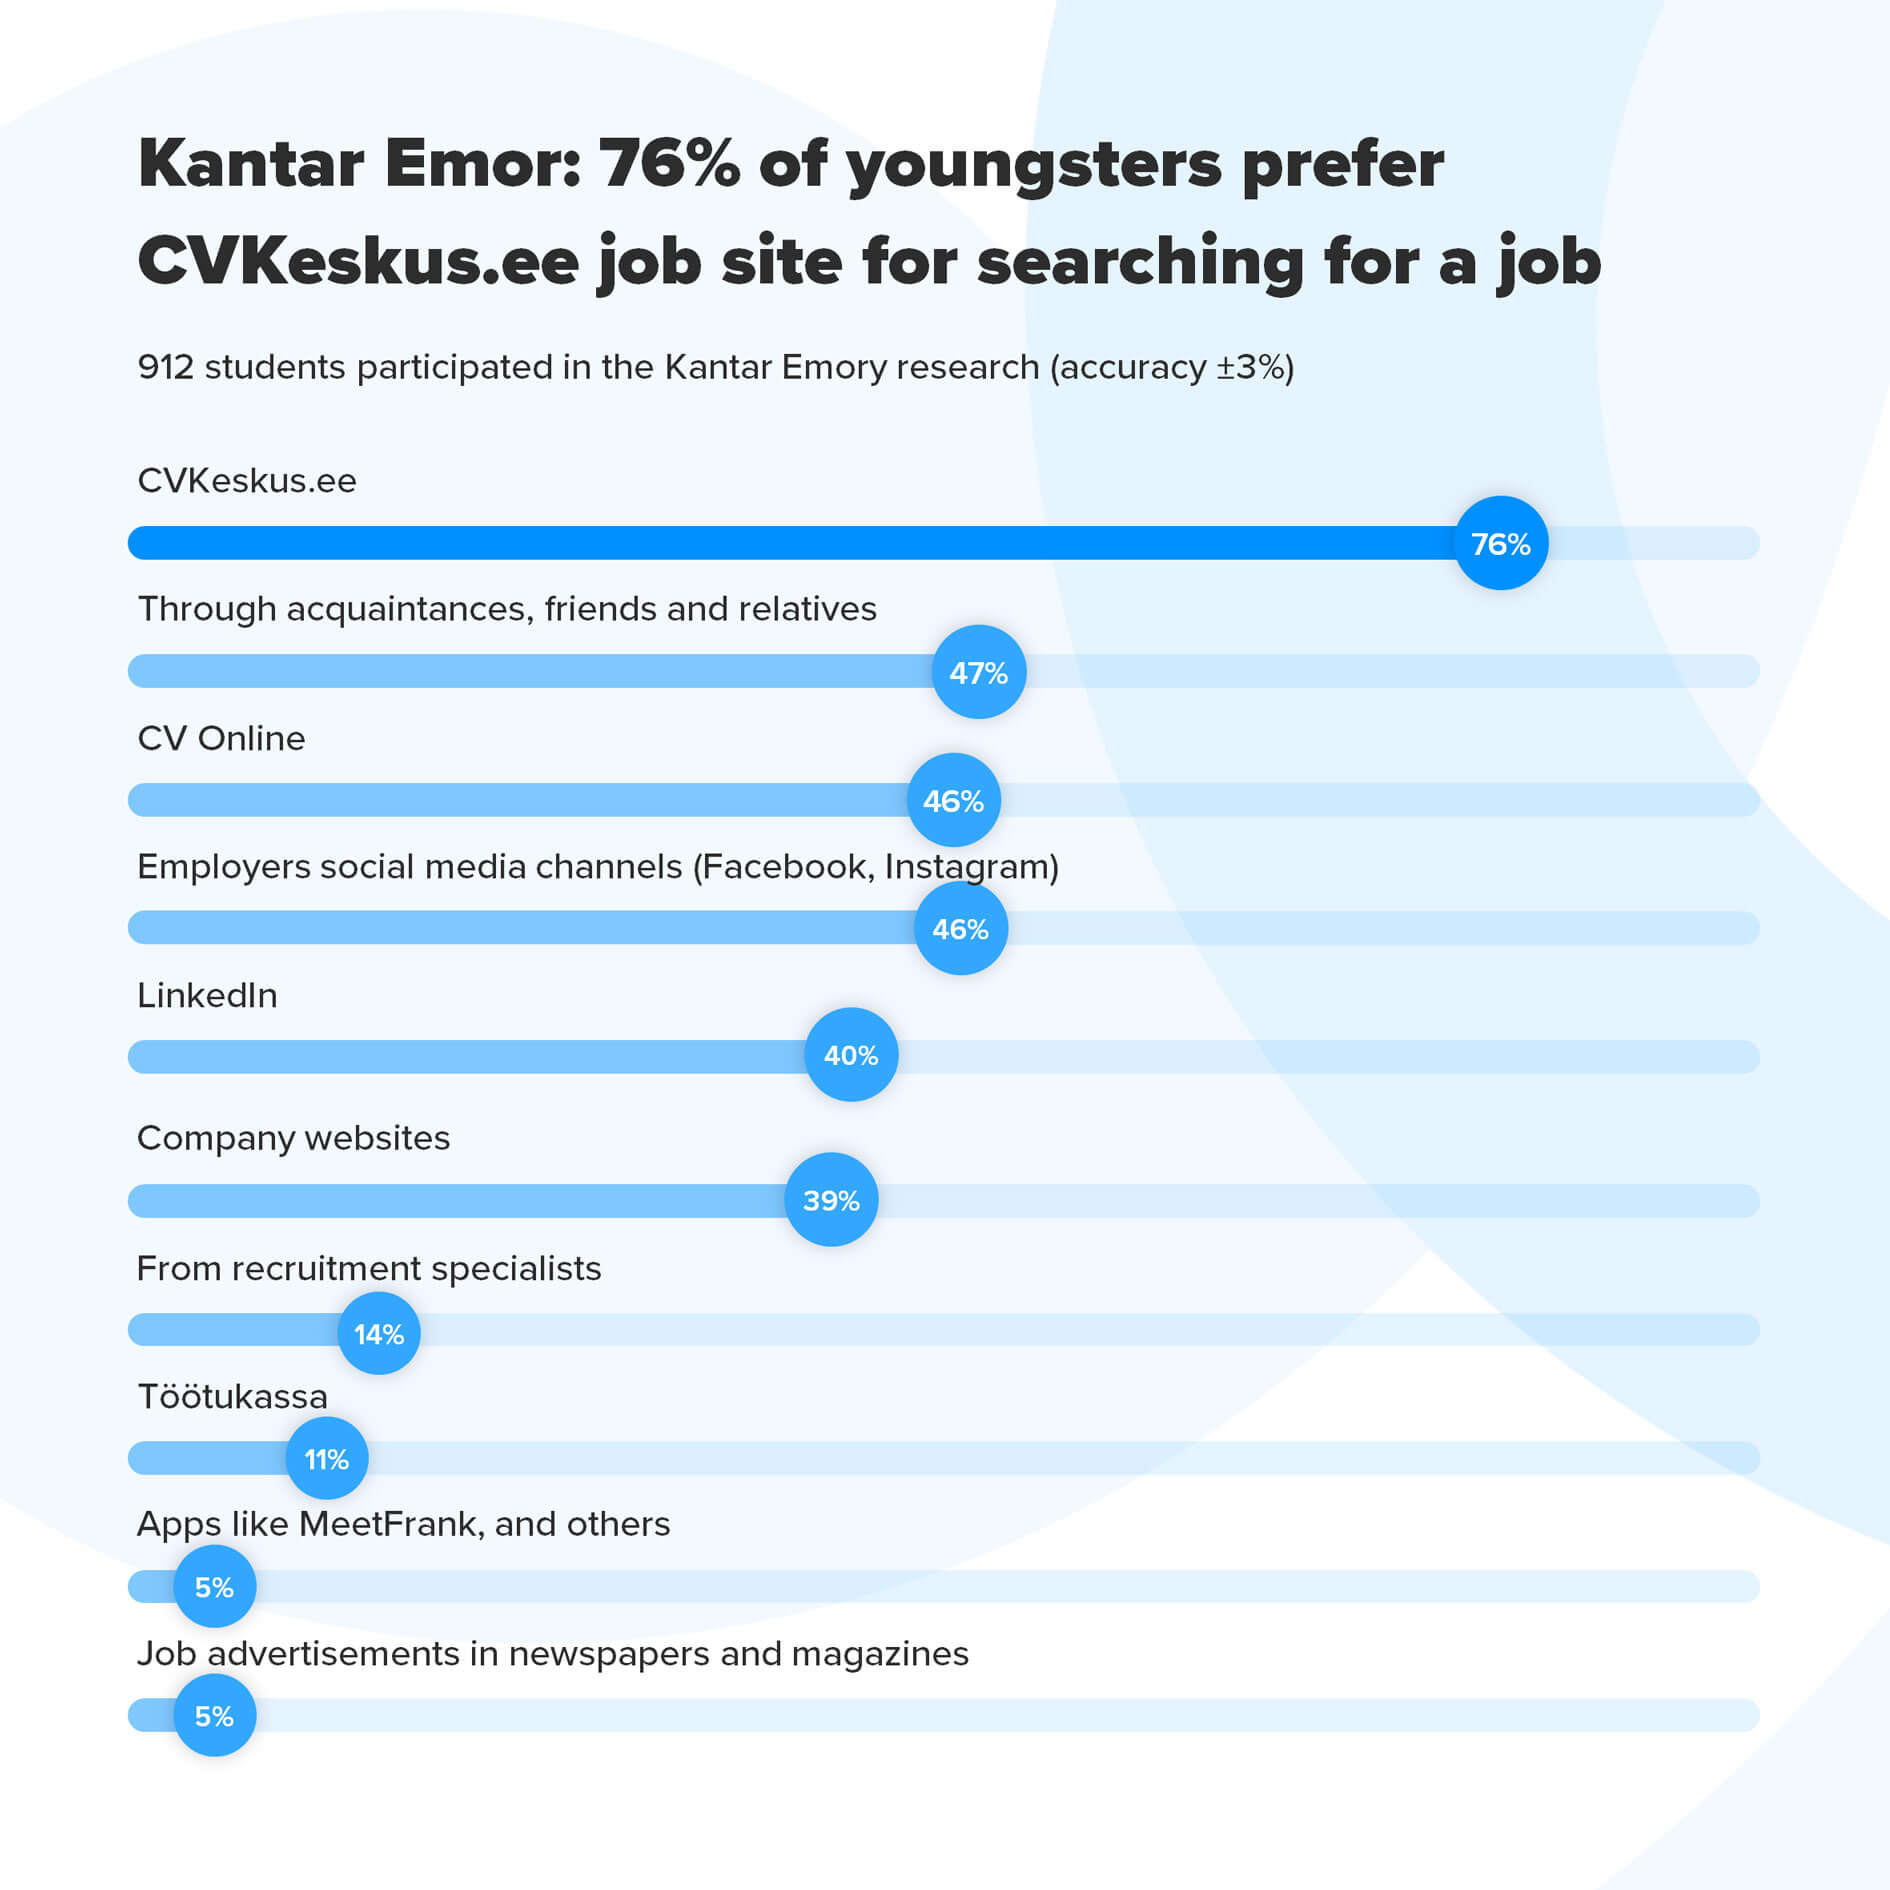 The Kantar Emor survey revealed the most preferred job search channels of students